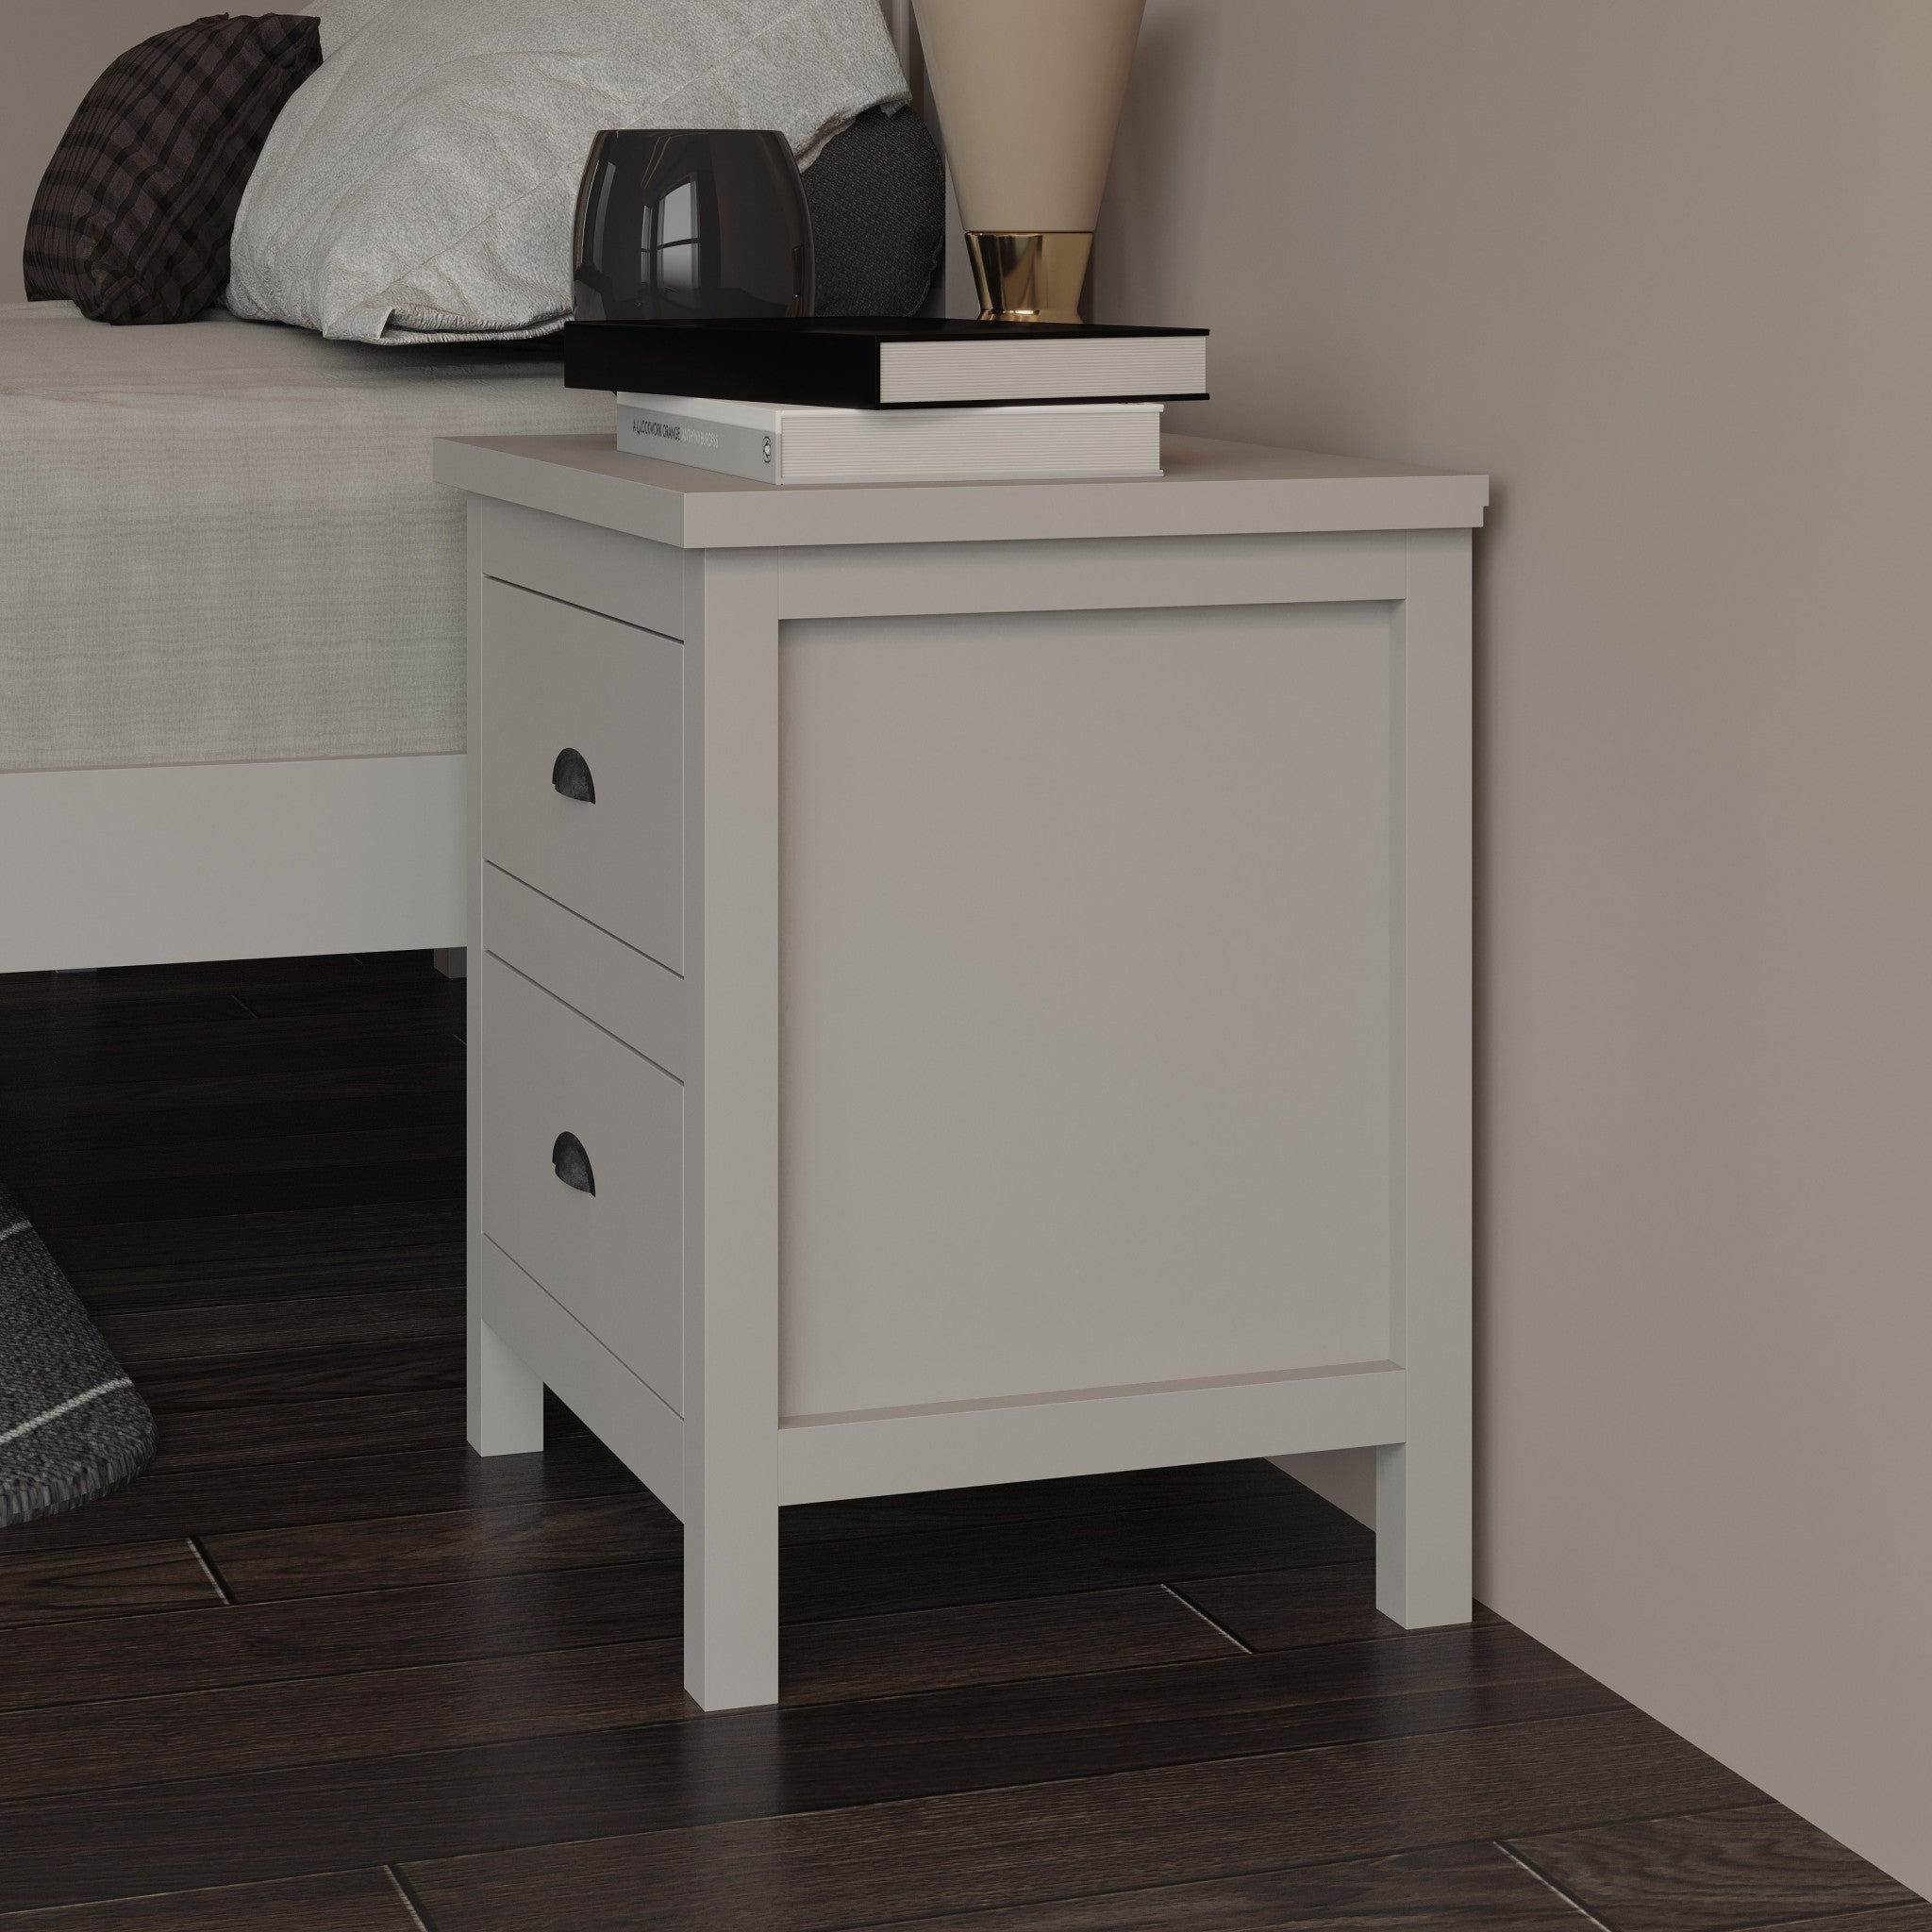 16" Gray Two Drawer Solid Wood Nightstand